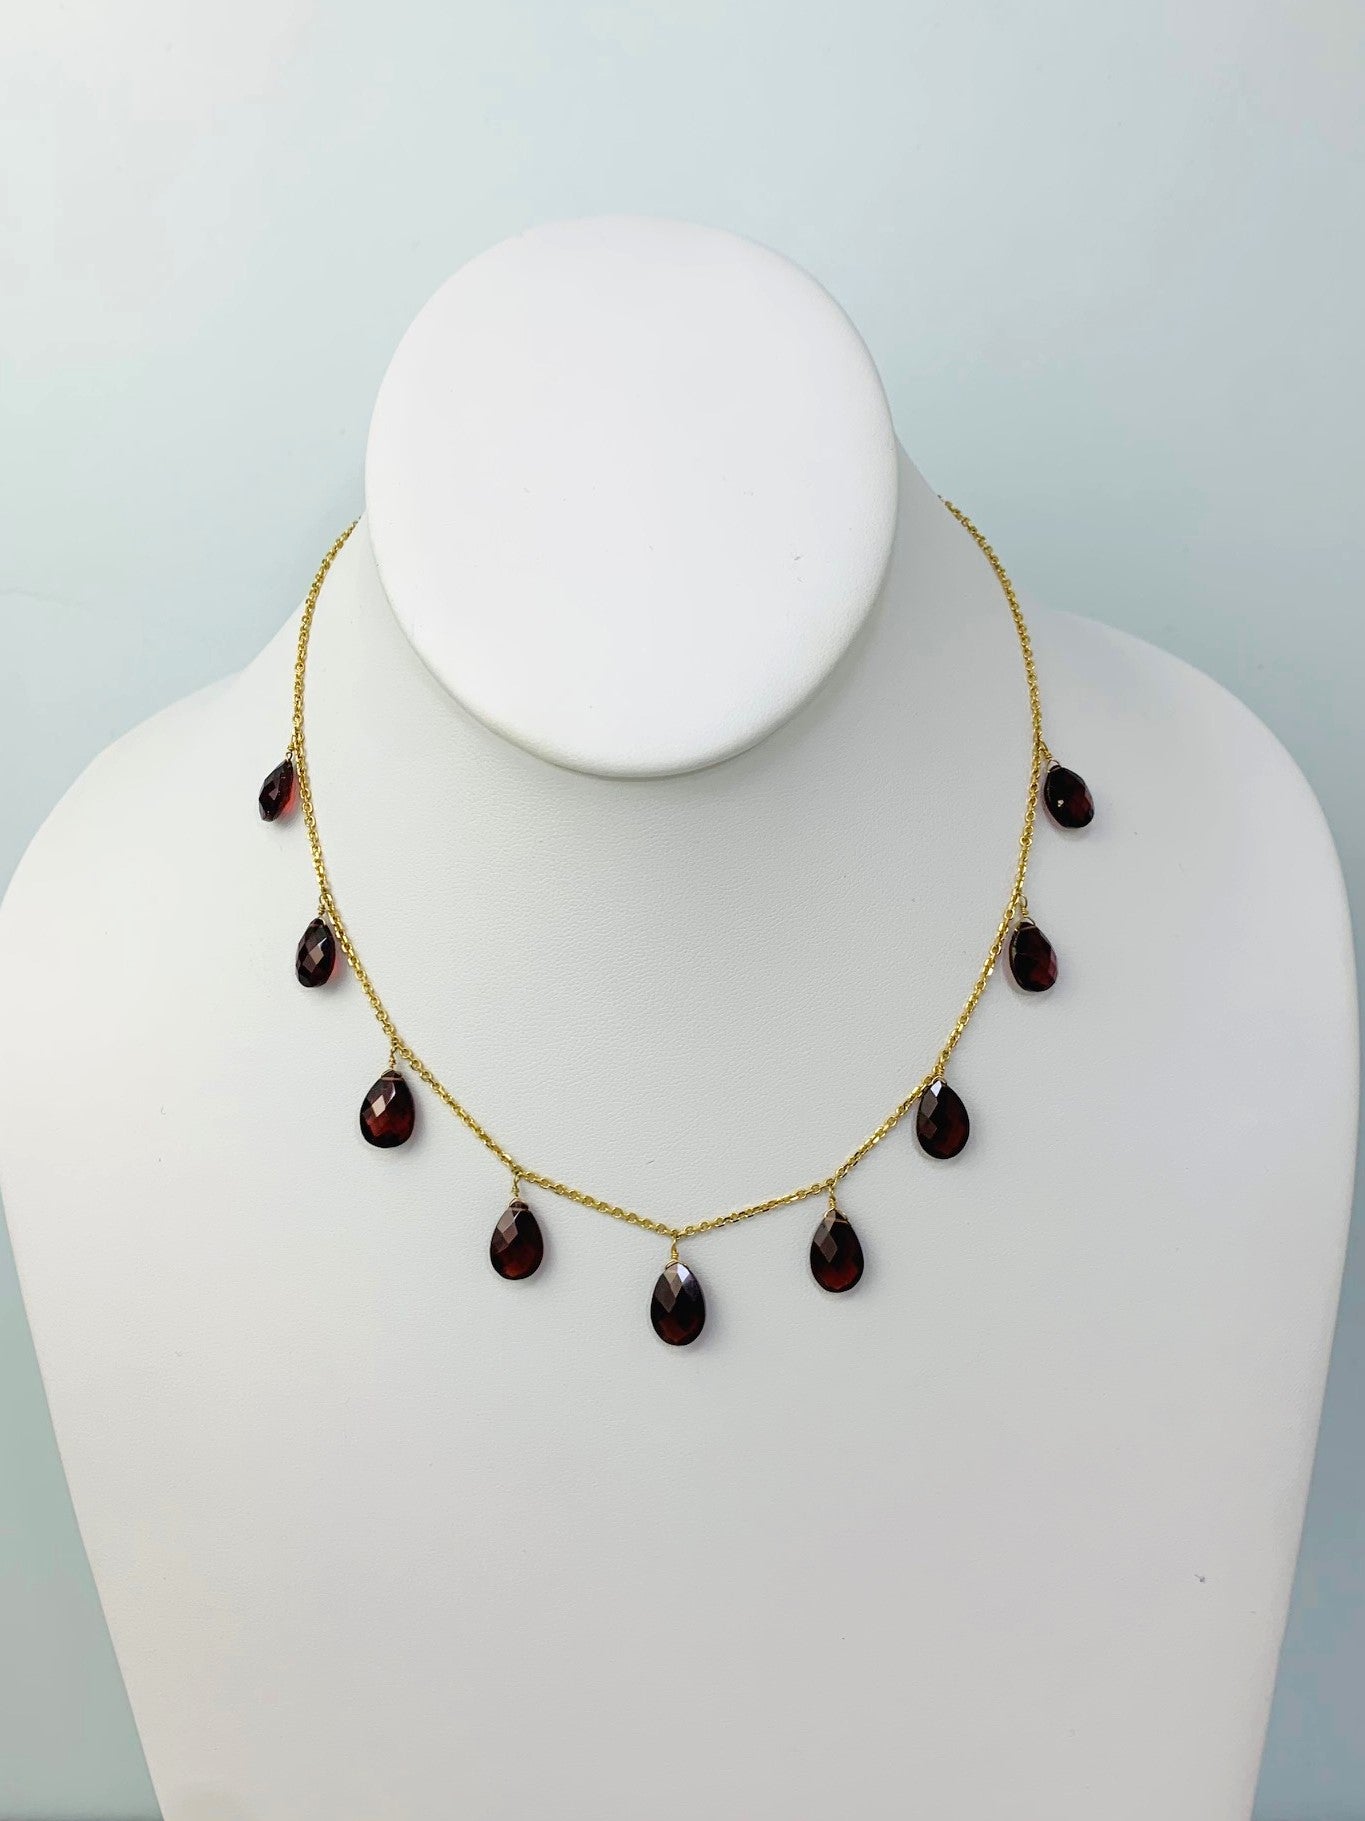 Clearance Sale! - 15-16" Garnet 9 Station Pear Dangle Necklace in 14KY - NCK-408-DNGGM14Y-GNT-16